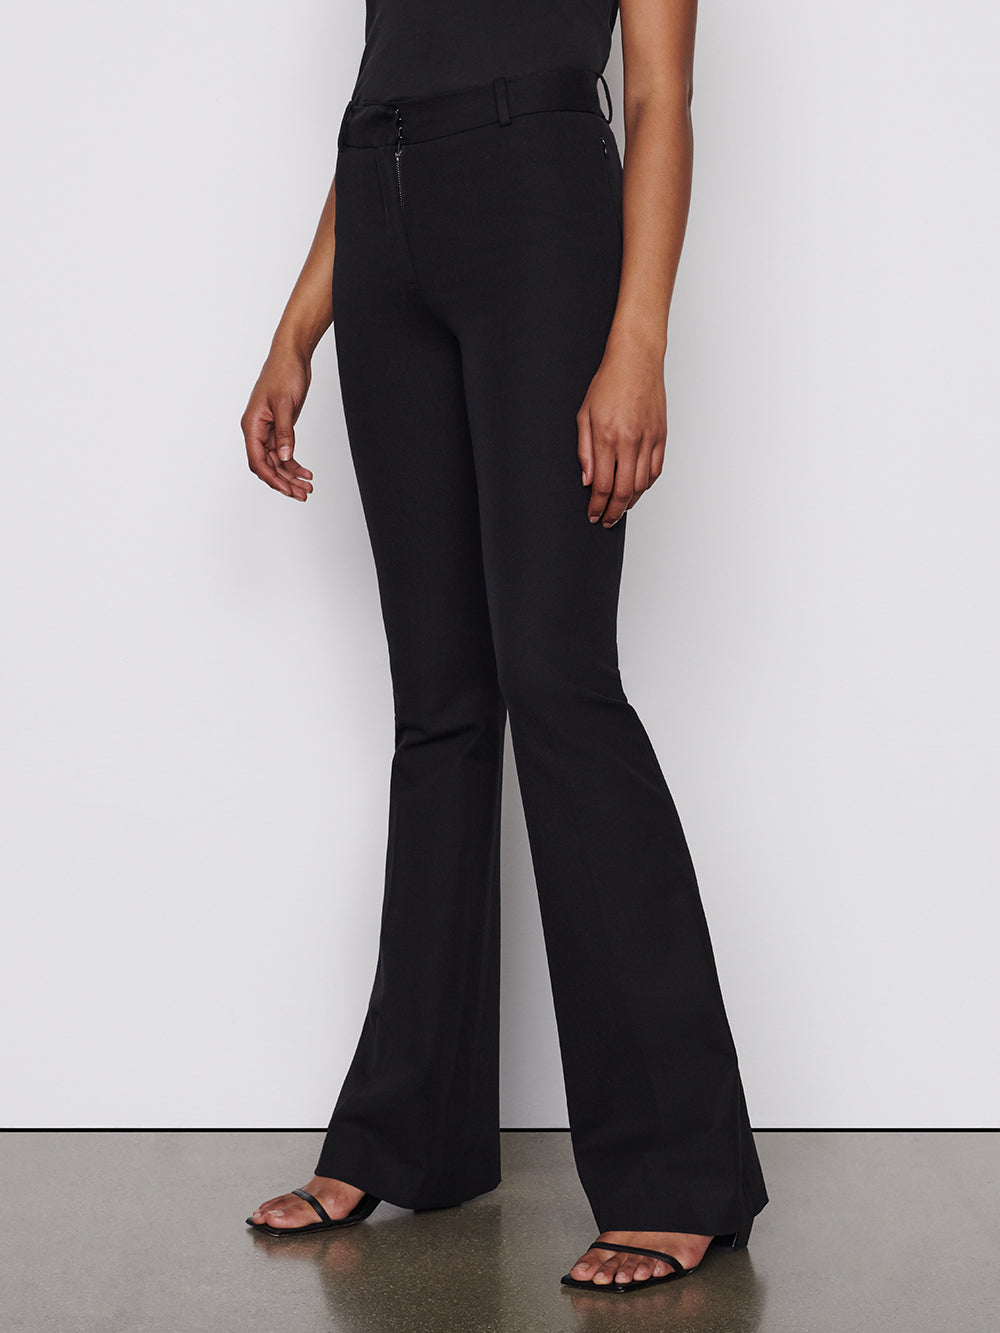 FRAME Slim Exaggerated Flare Trouser in Black